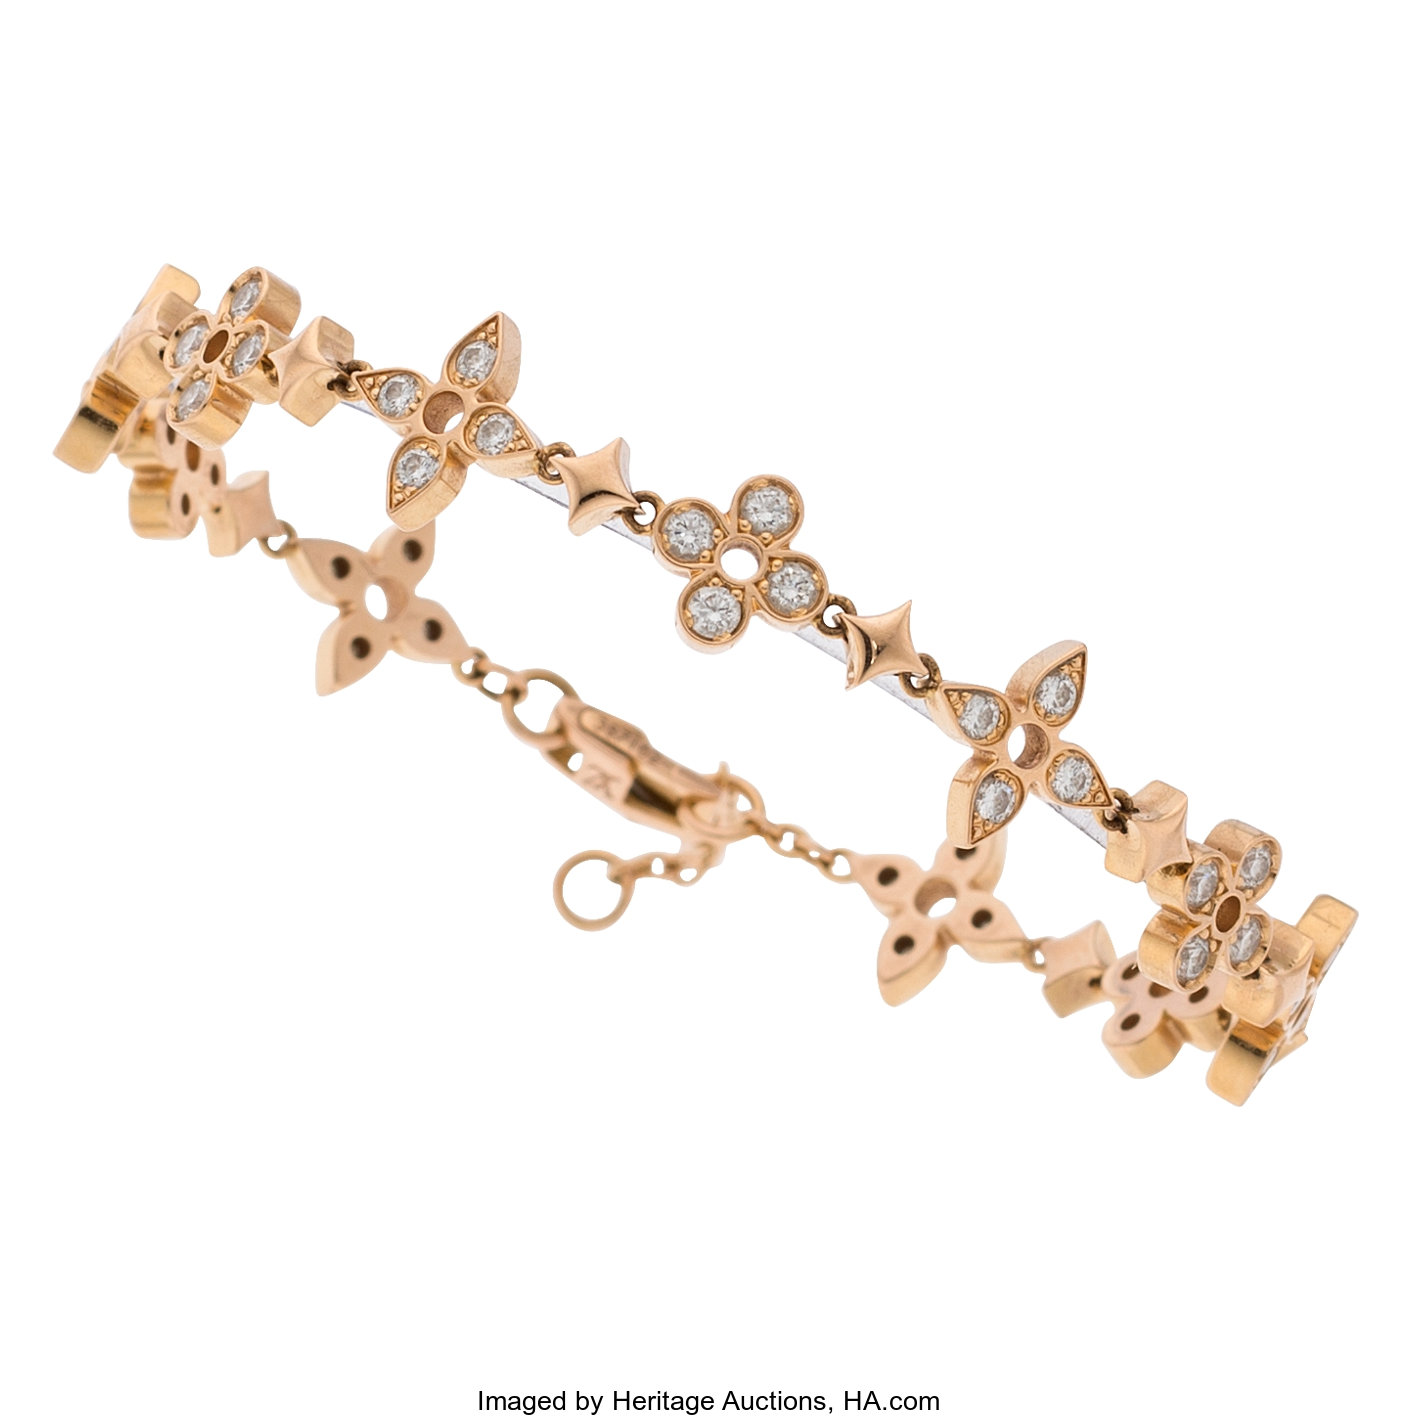 Sold at Auction: LOUIS VUITTON IDYLLE BLOSSOM LV BRACELET, YELLOW GOLD